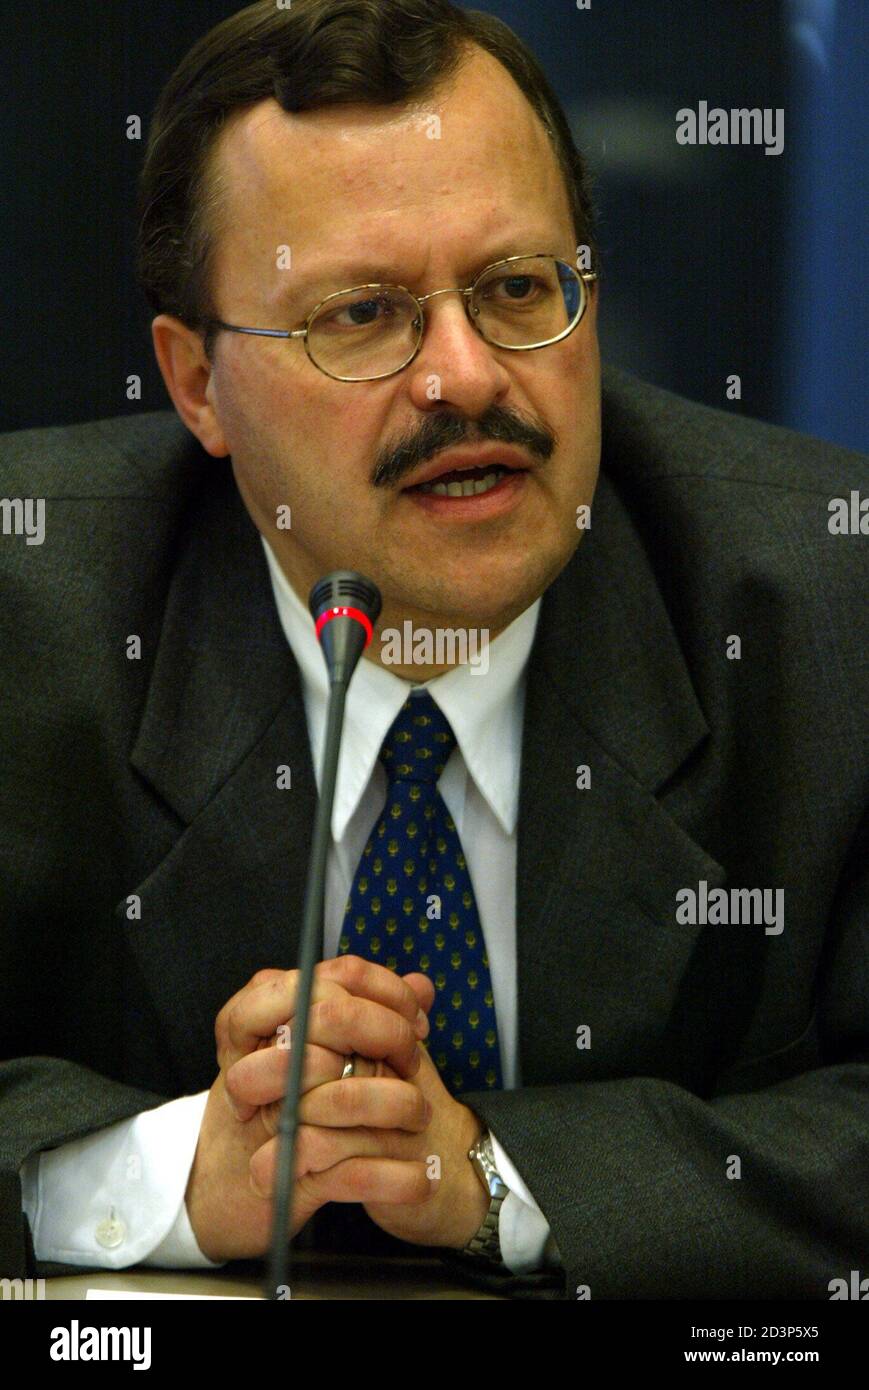 Mat Herben, the new leader of the anti-immigration List Pim Fortuyn (LPF)  party, speaks during a press conference at the Dutch Parliament building in  The Hague May 16, 2002. Set up only